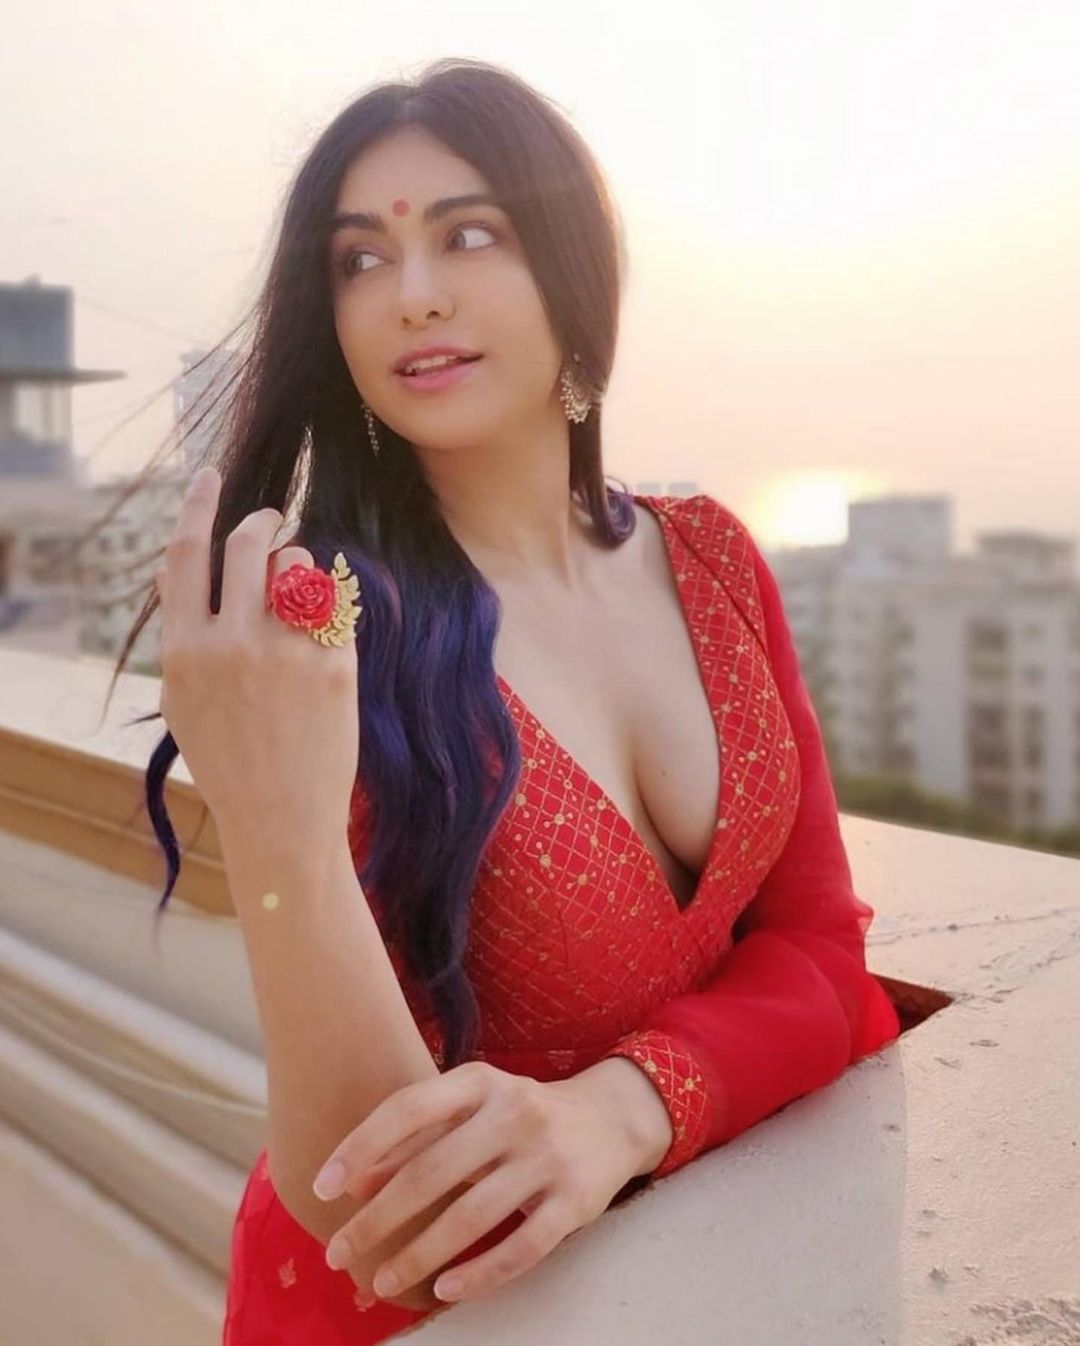 The Kerala Story Actress, Adah Sharma Left Studies After School, Net Worth, Controversies, More picture